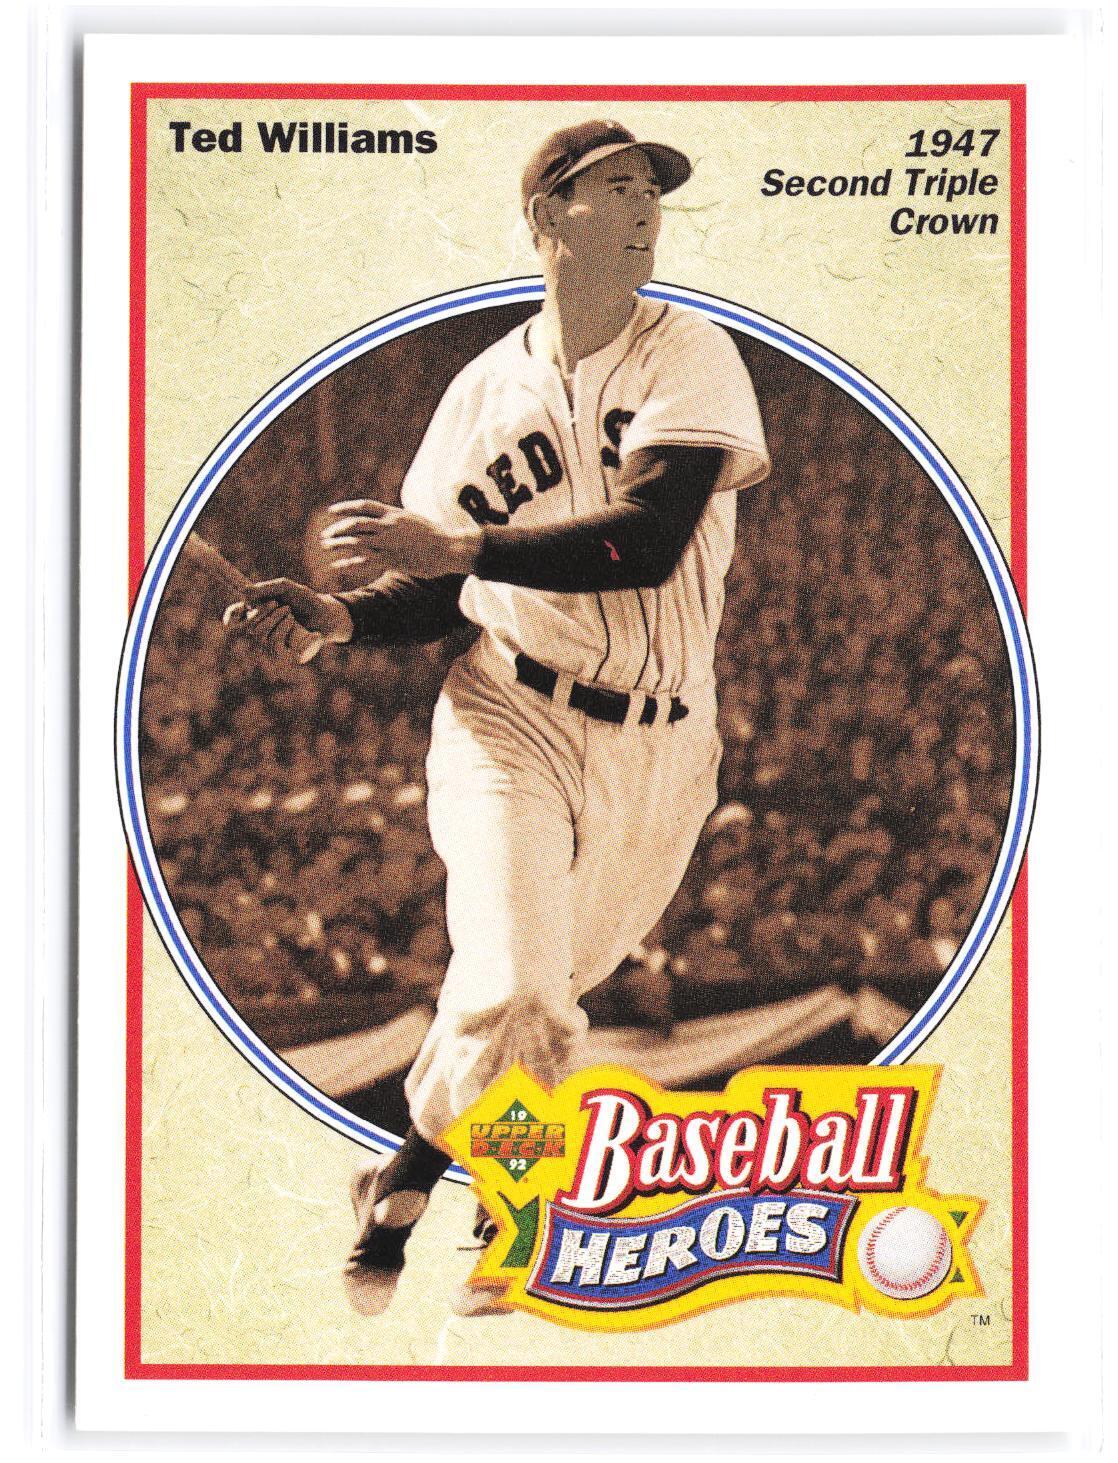 1992 Upper Deck #32 Ted Williams Baseball Heroes: Ted Williams